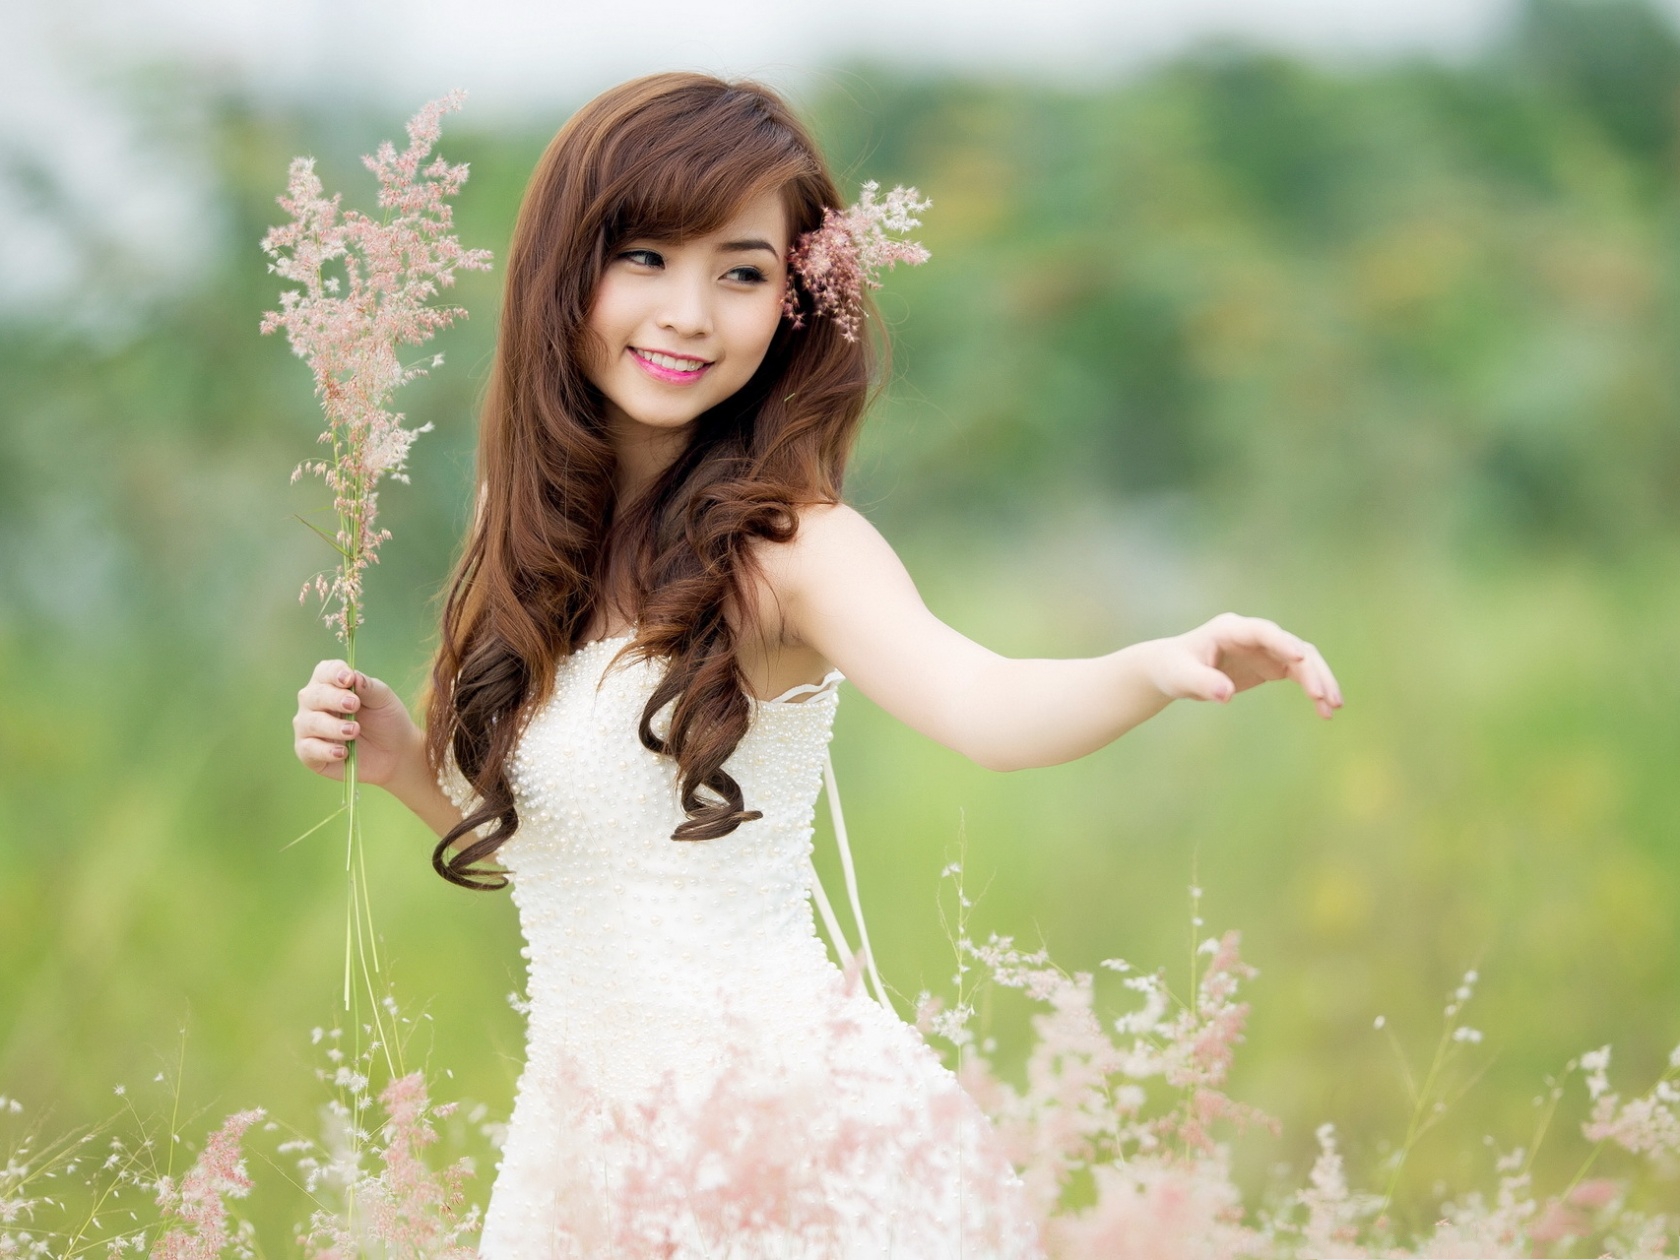 Anty e le tre zie. Girl-in-nature-beautiful-girl-smiling-flowers-in-the-hair-and-hands